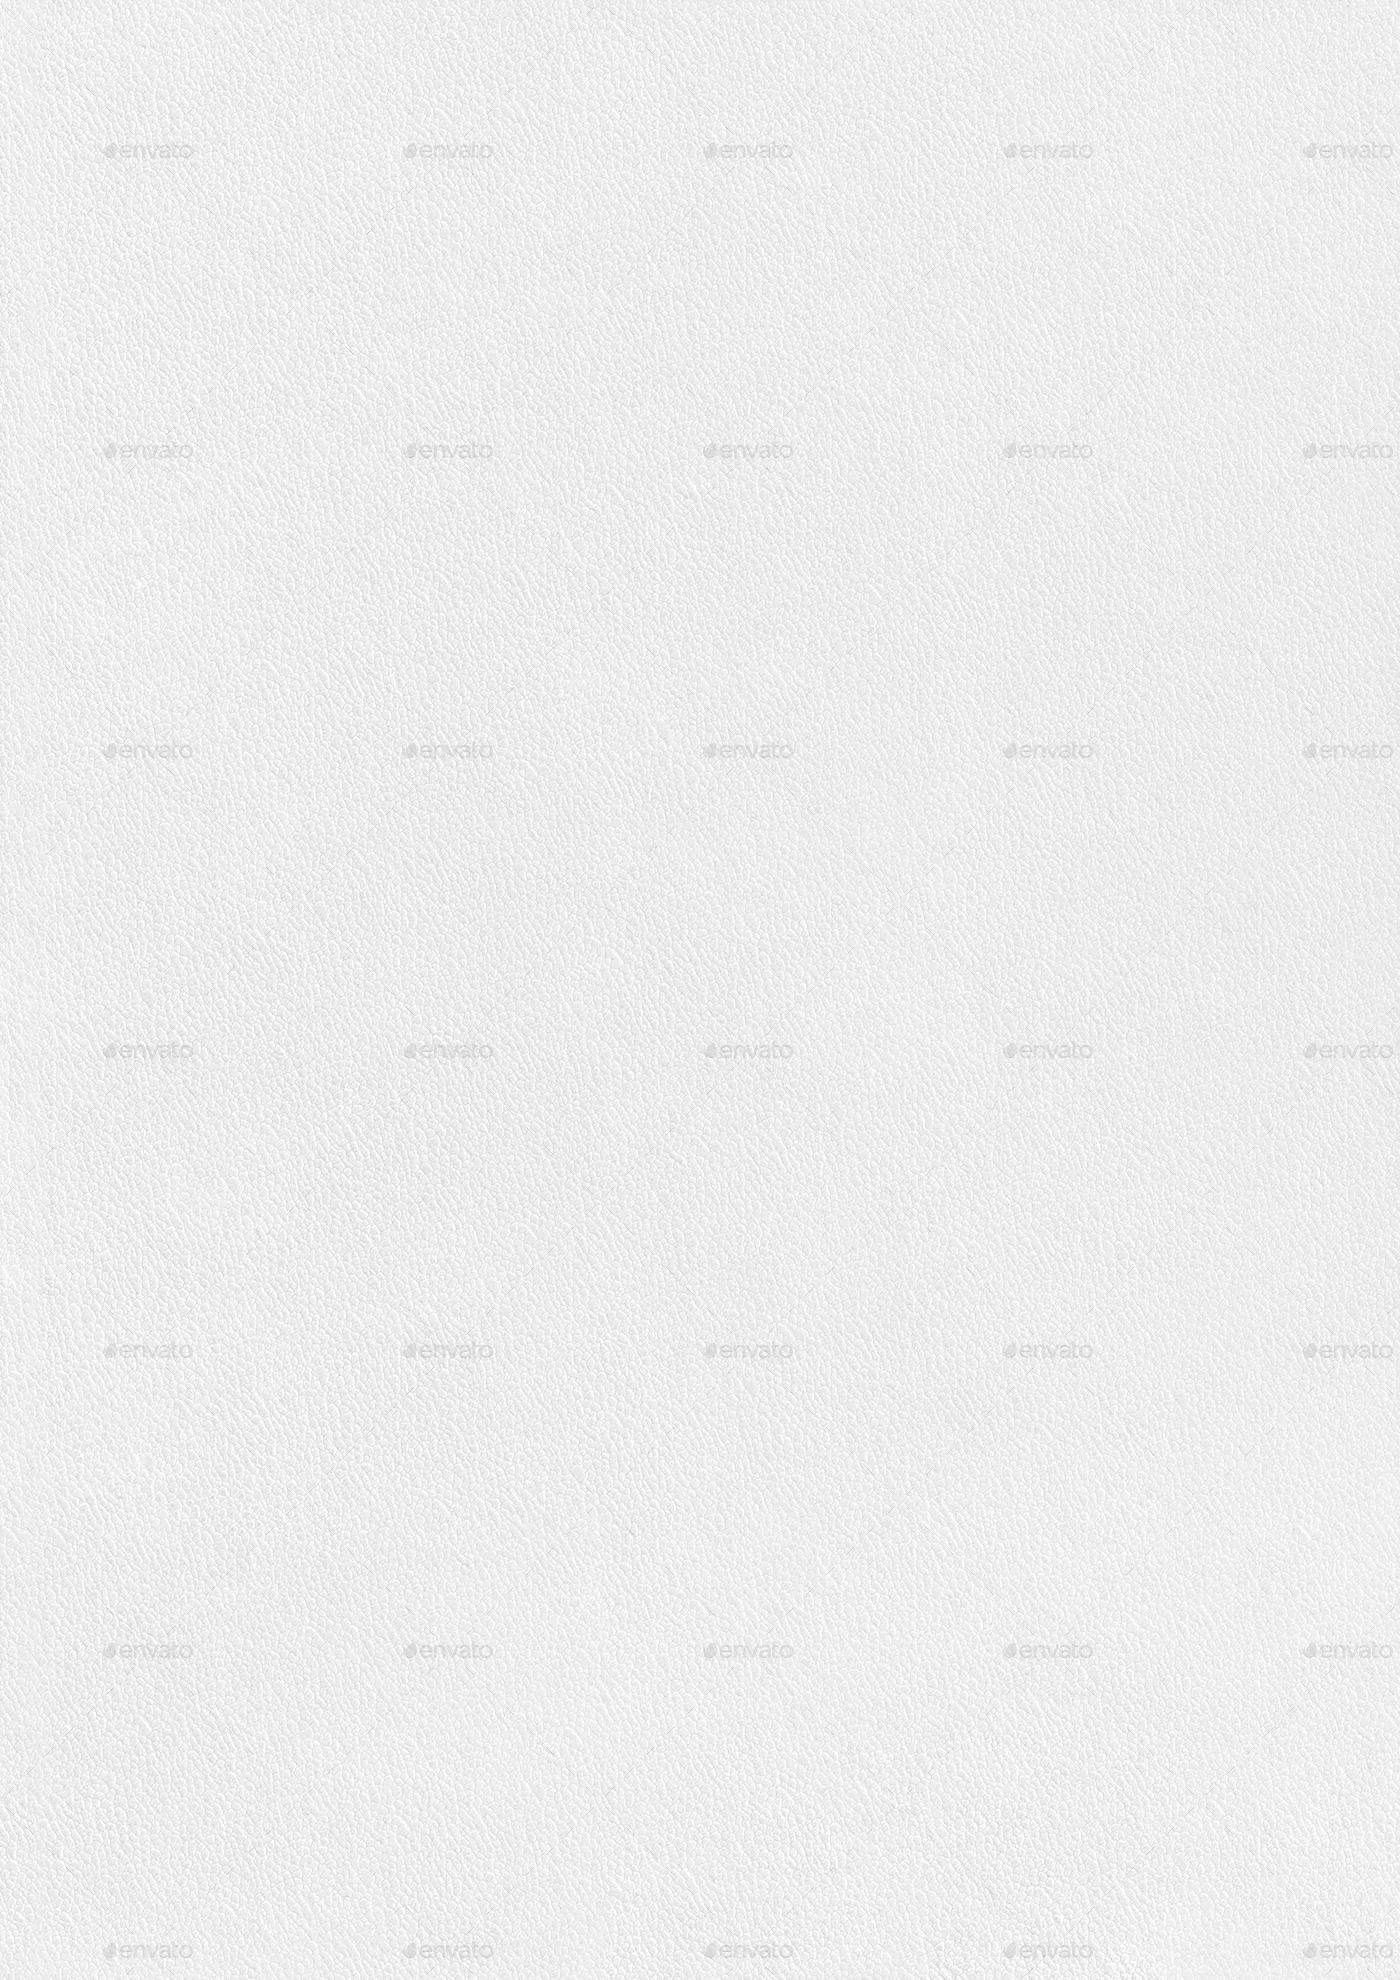 26 White Paper Background Textures by TexturesStore | 3DOcean